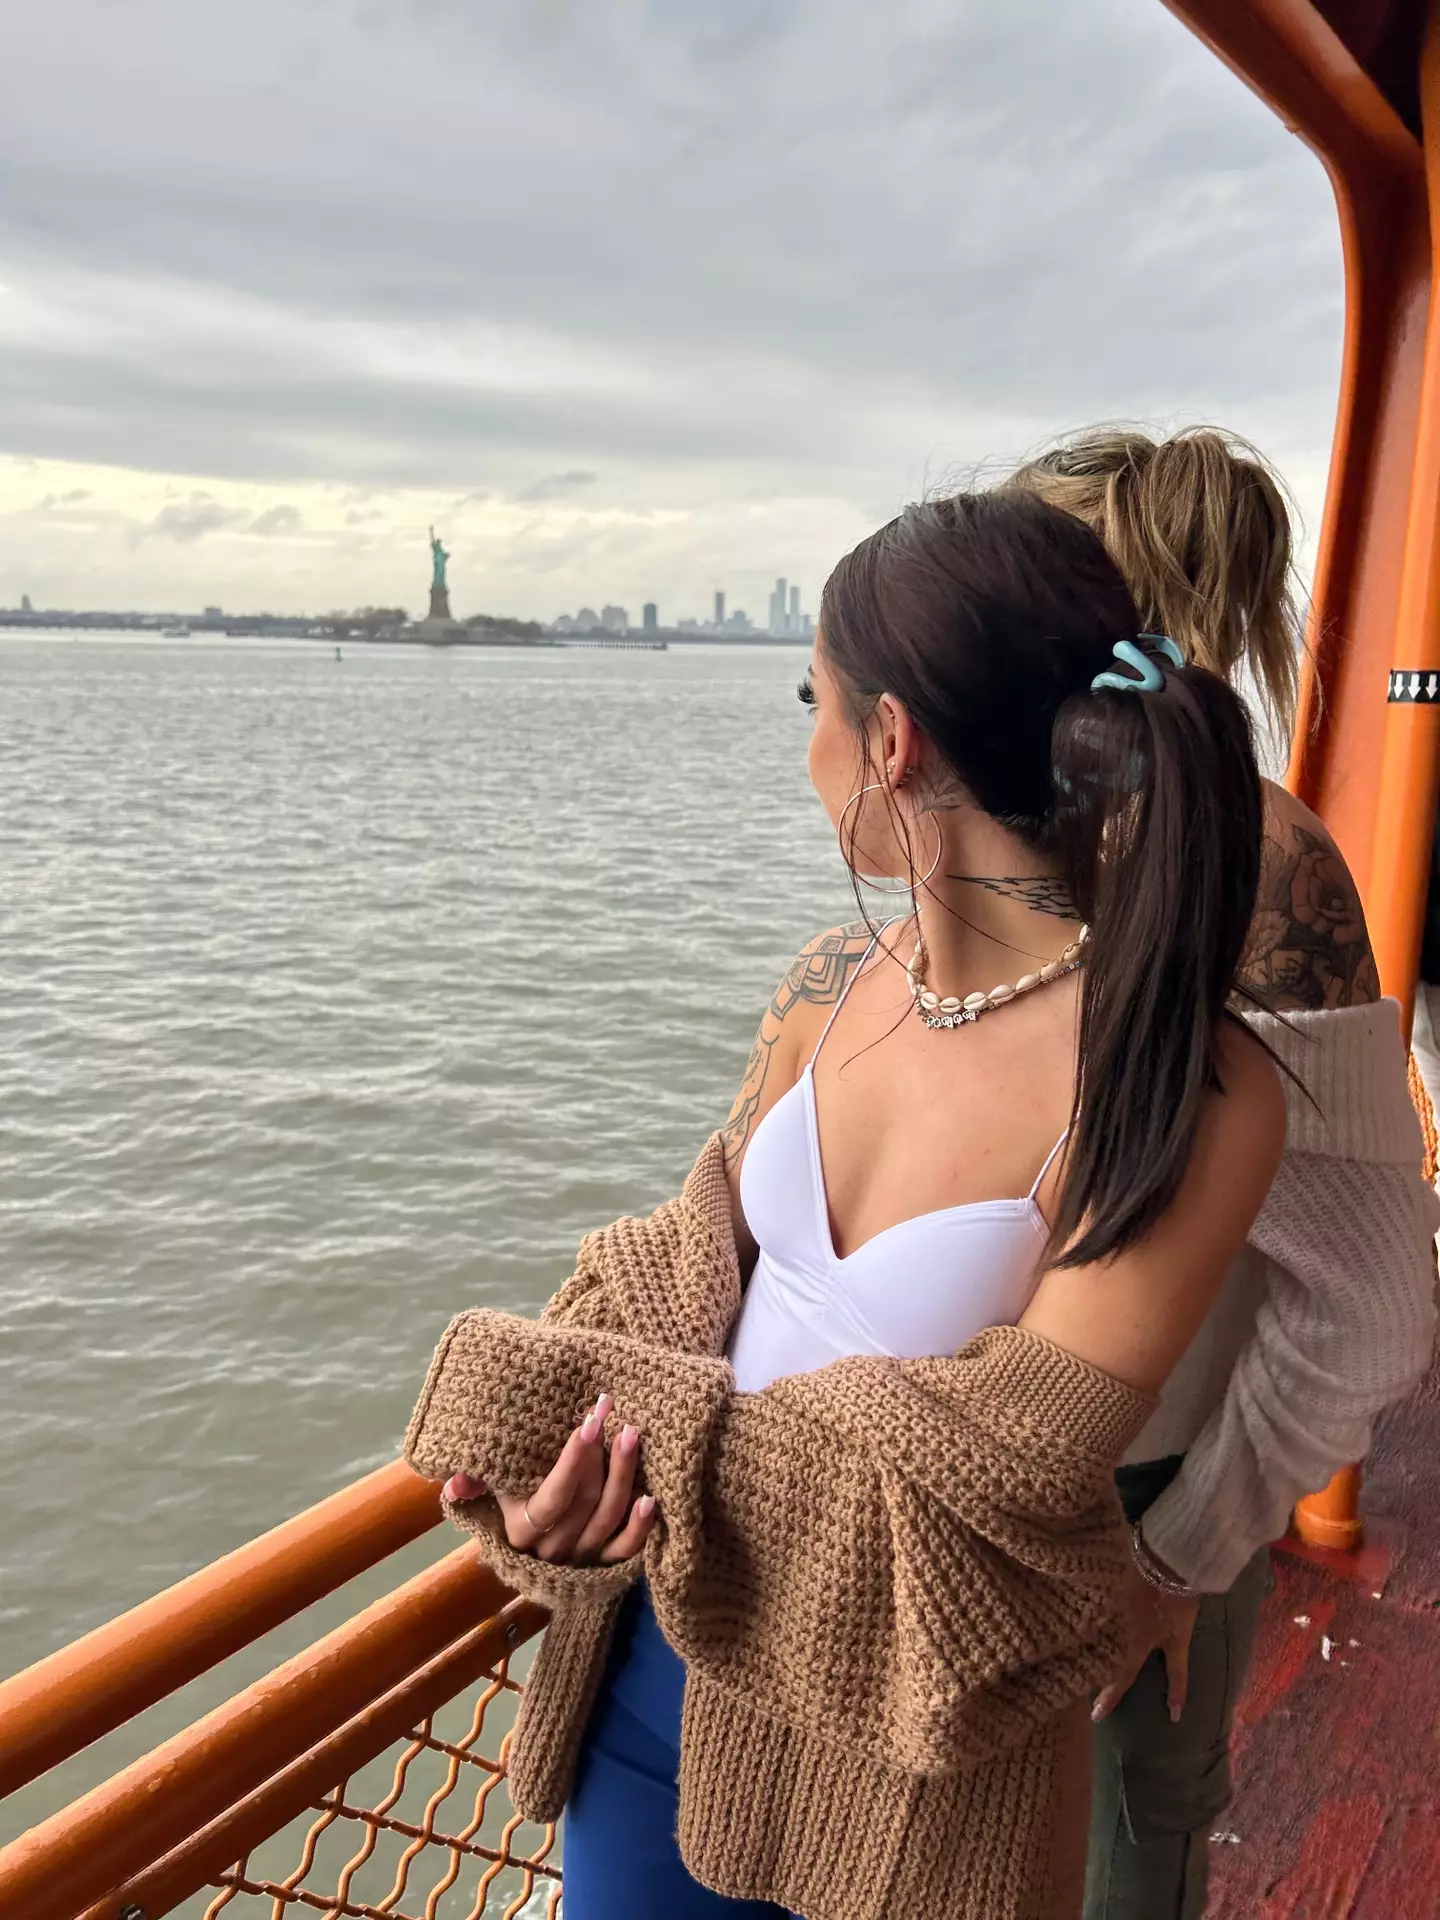 Megan and Georgina on the Staten Island Ferry, which is free. (Megan Smith)